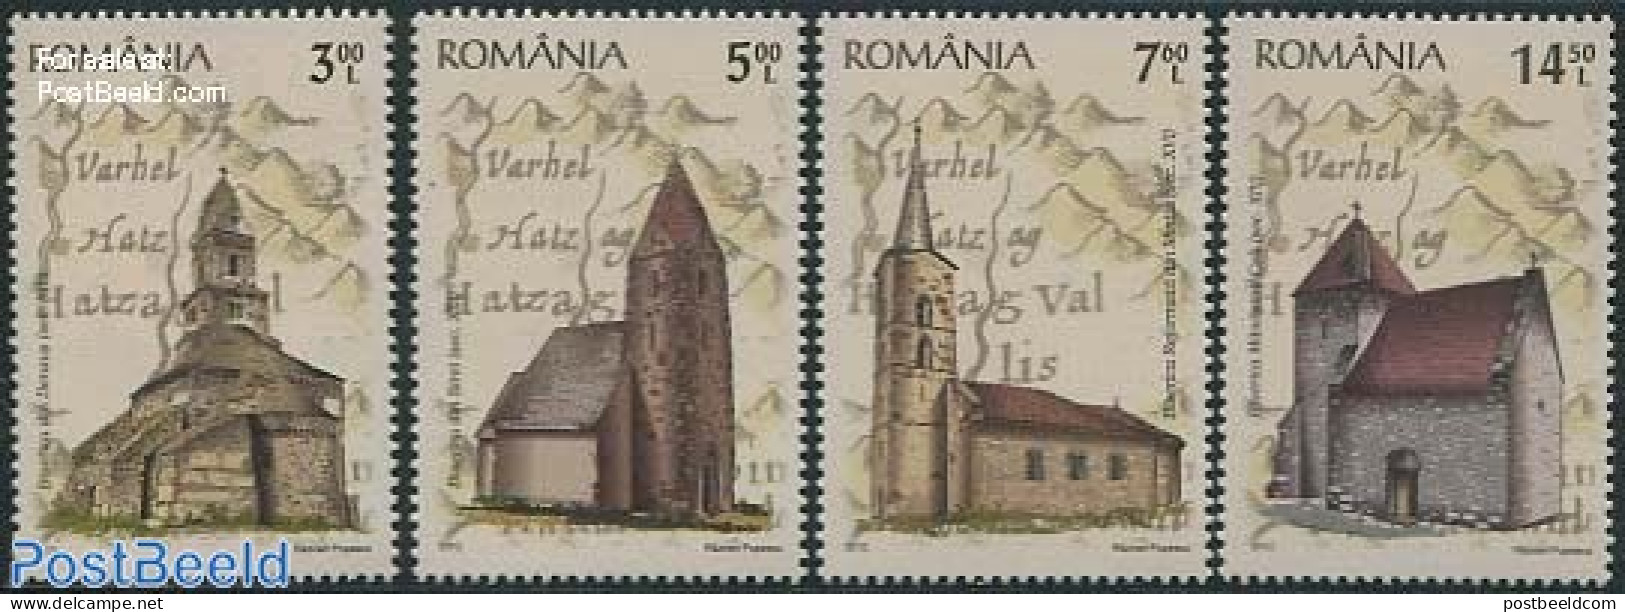 Romania 2012 Tara Hategului Church 4v, Mint NH, Religion - Churches, Temples, Mosques, Synagogues - Unused Stamps